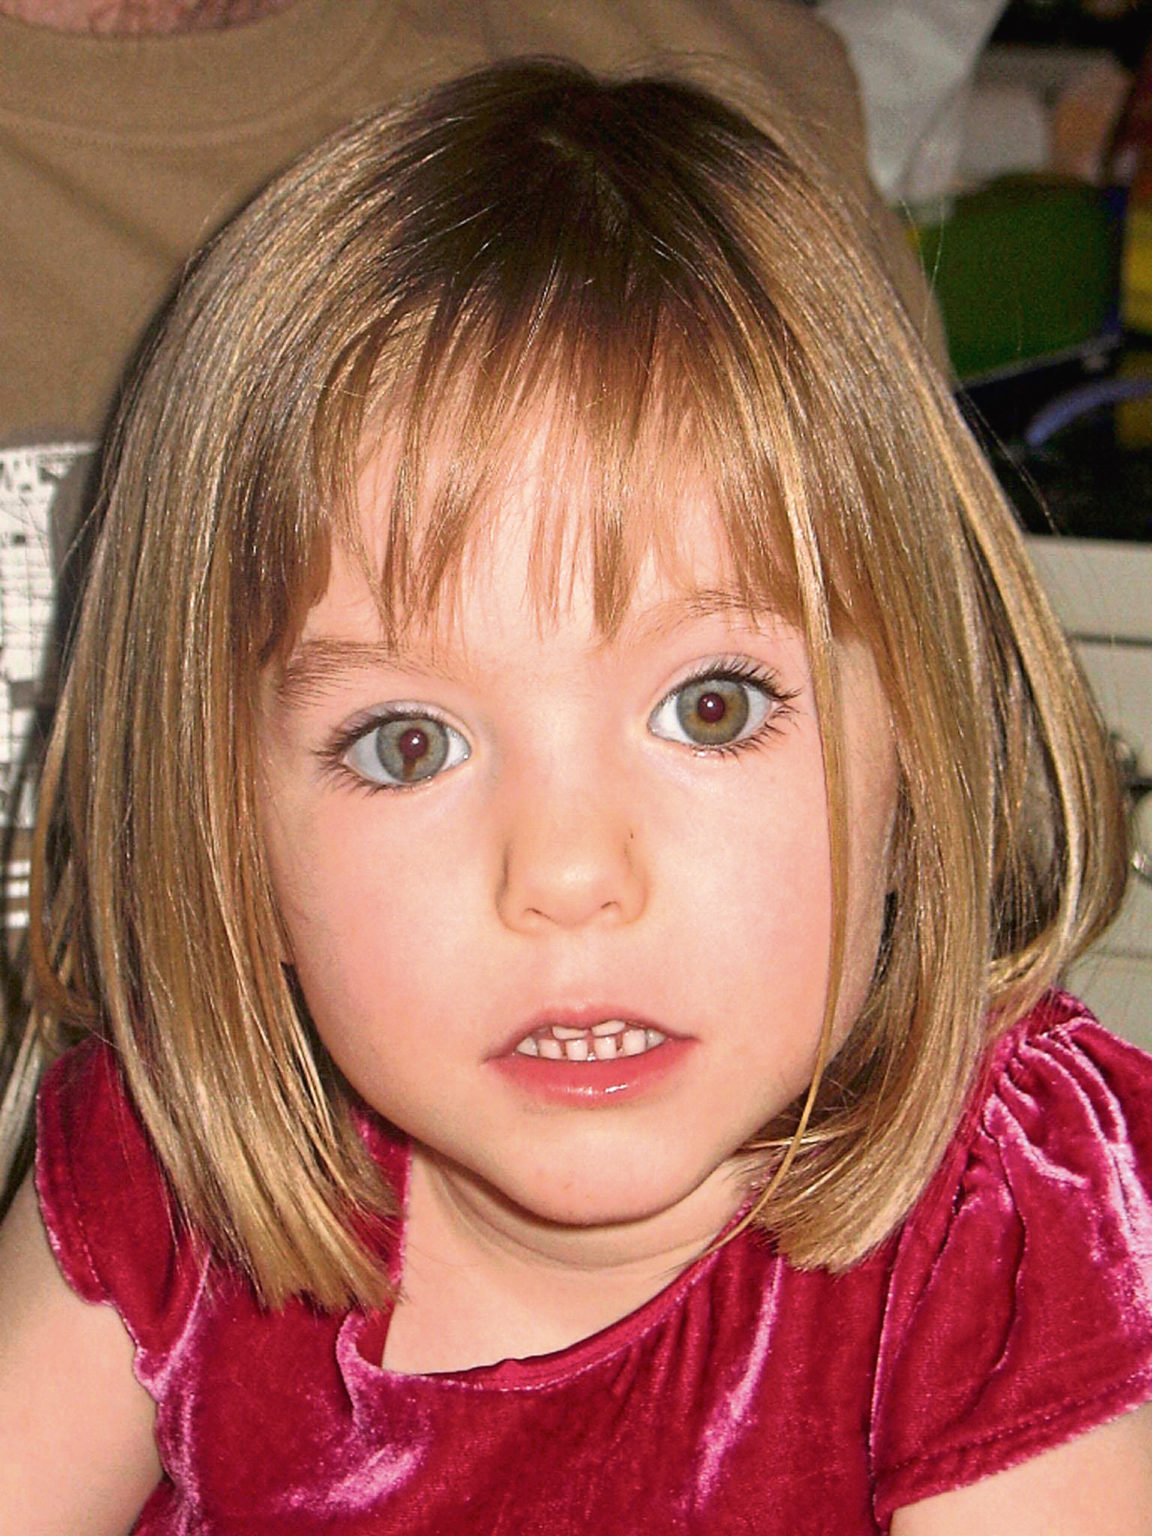 Police investigating Madeleine McCann disappearance receive hundreds of